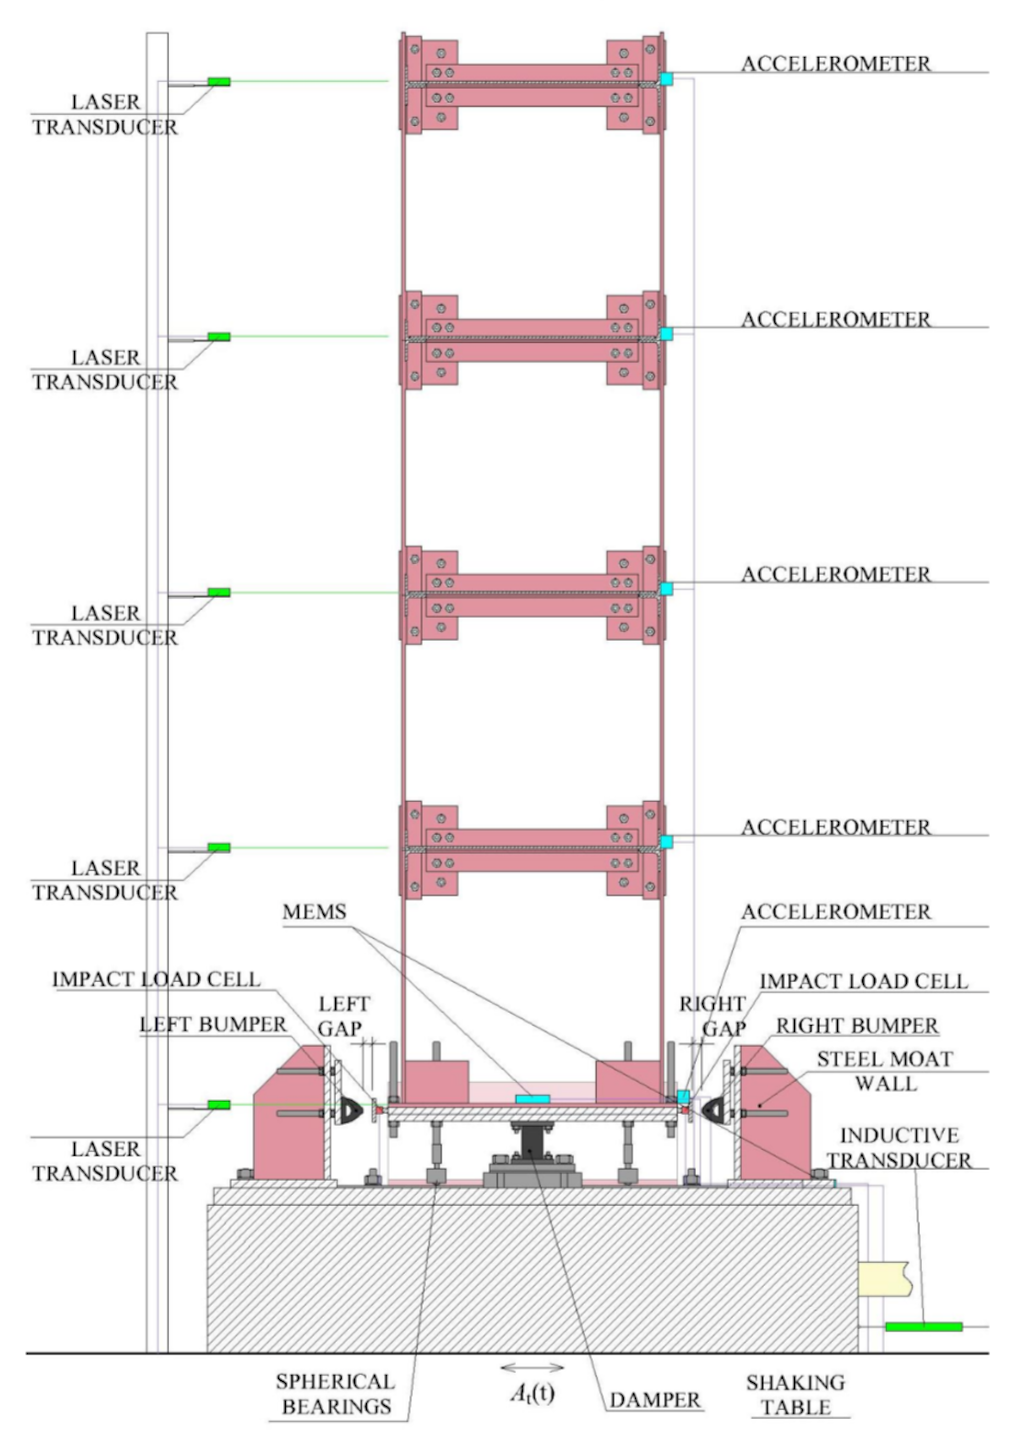 Figure 6. Schematic from the lateral view of the vibrating table and the acquisition system.